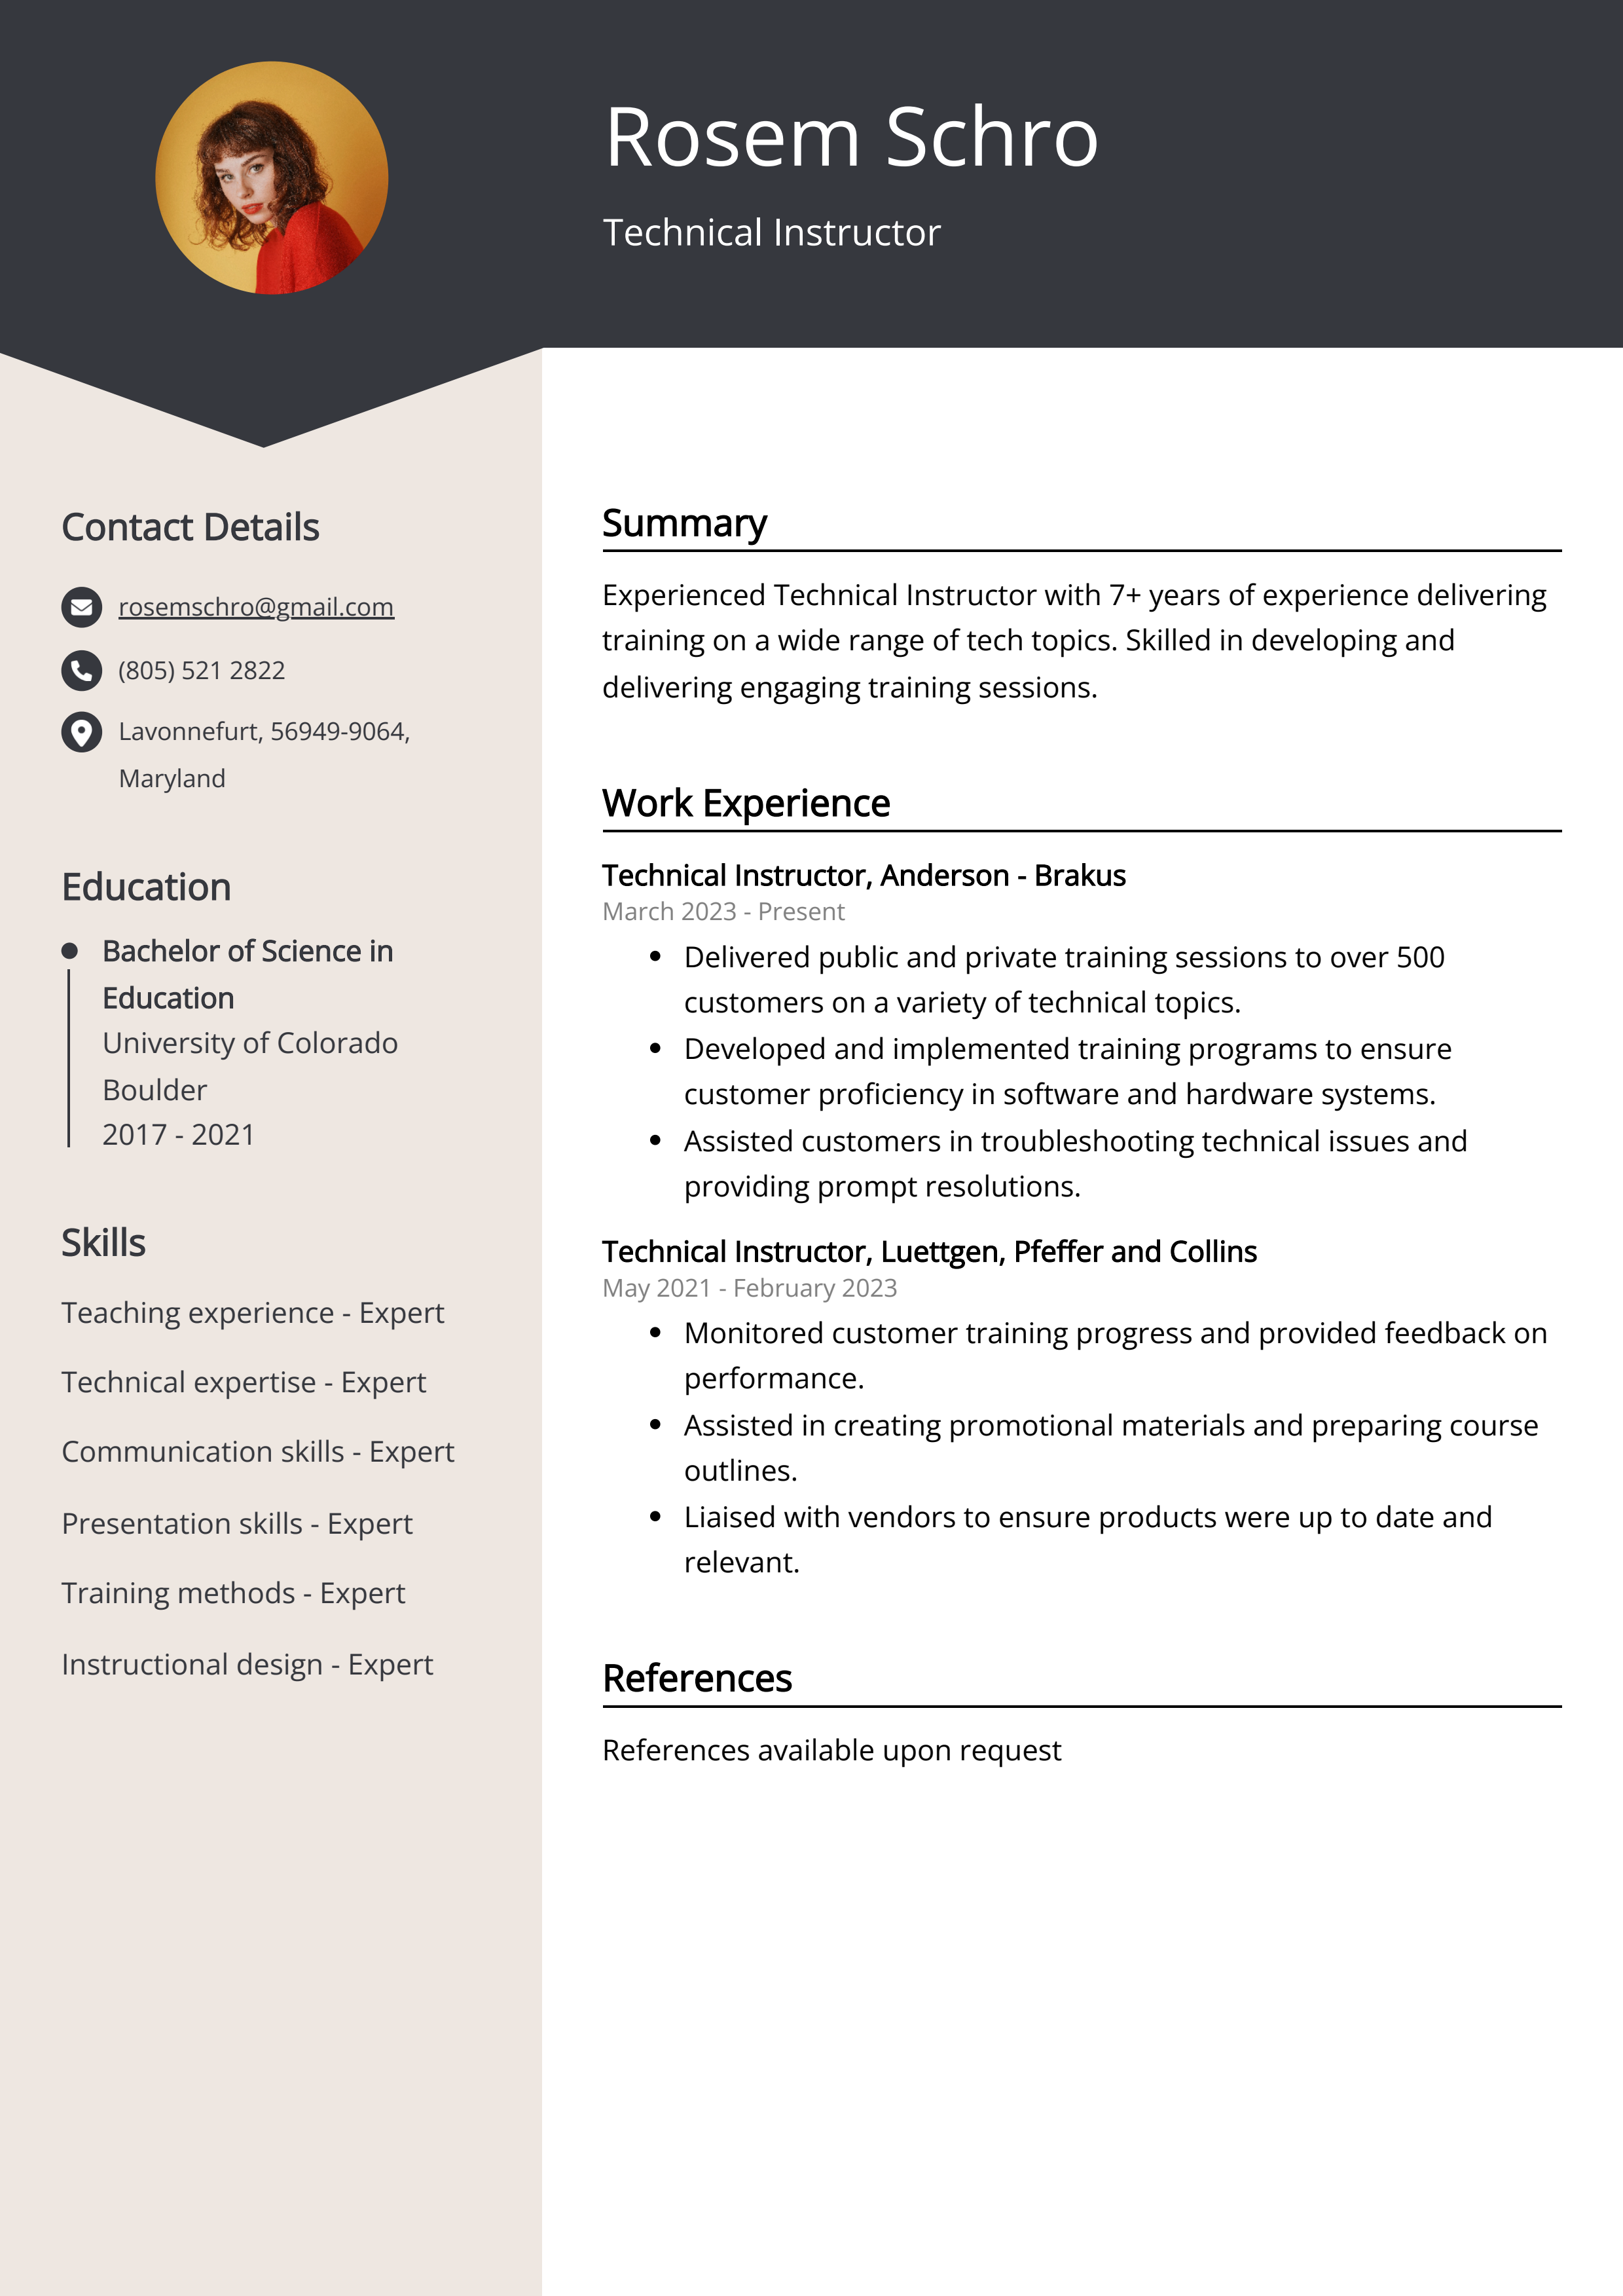 Technical Instructor CV Example